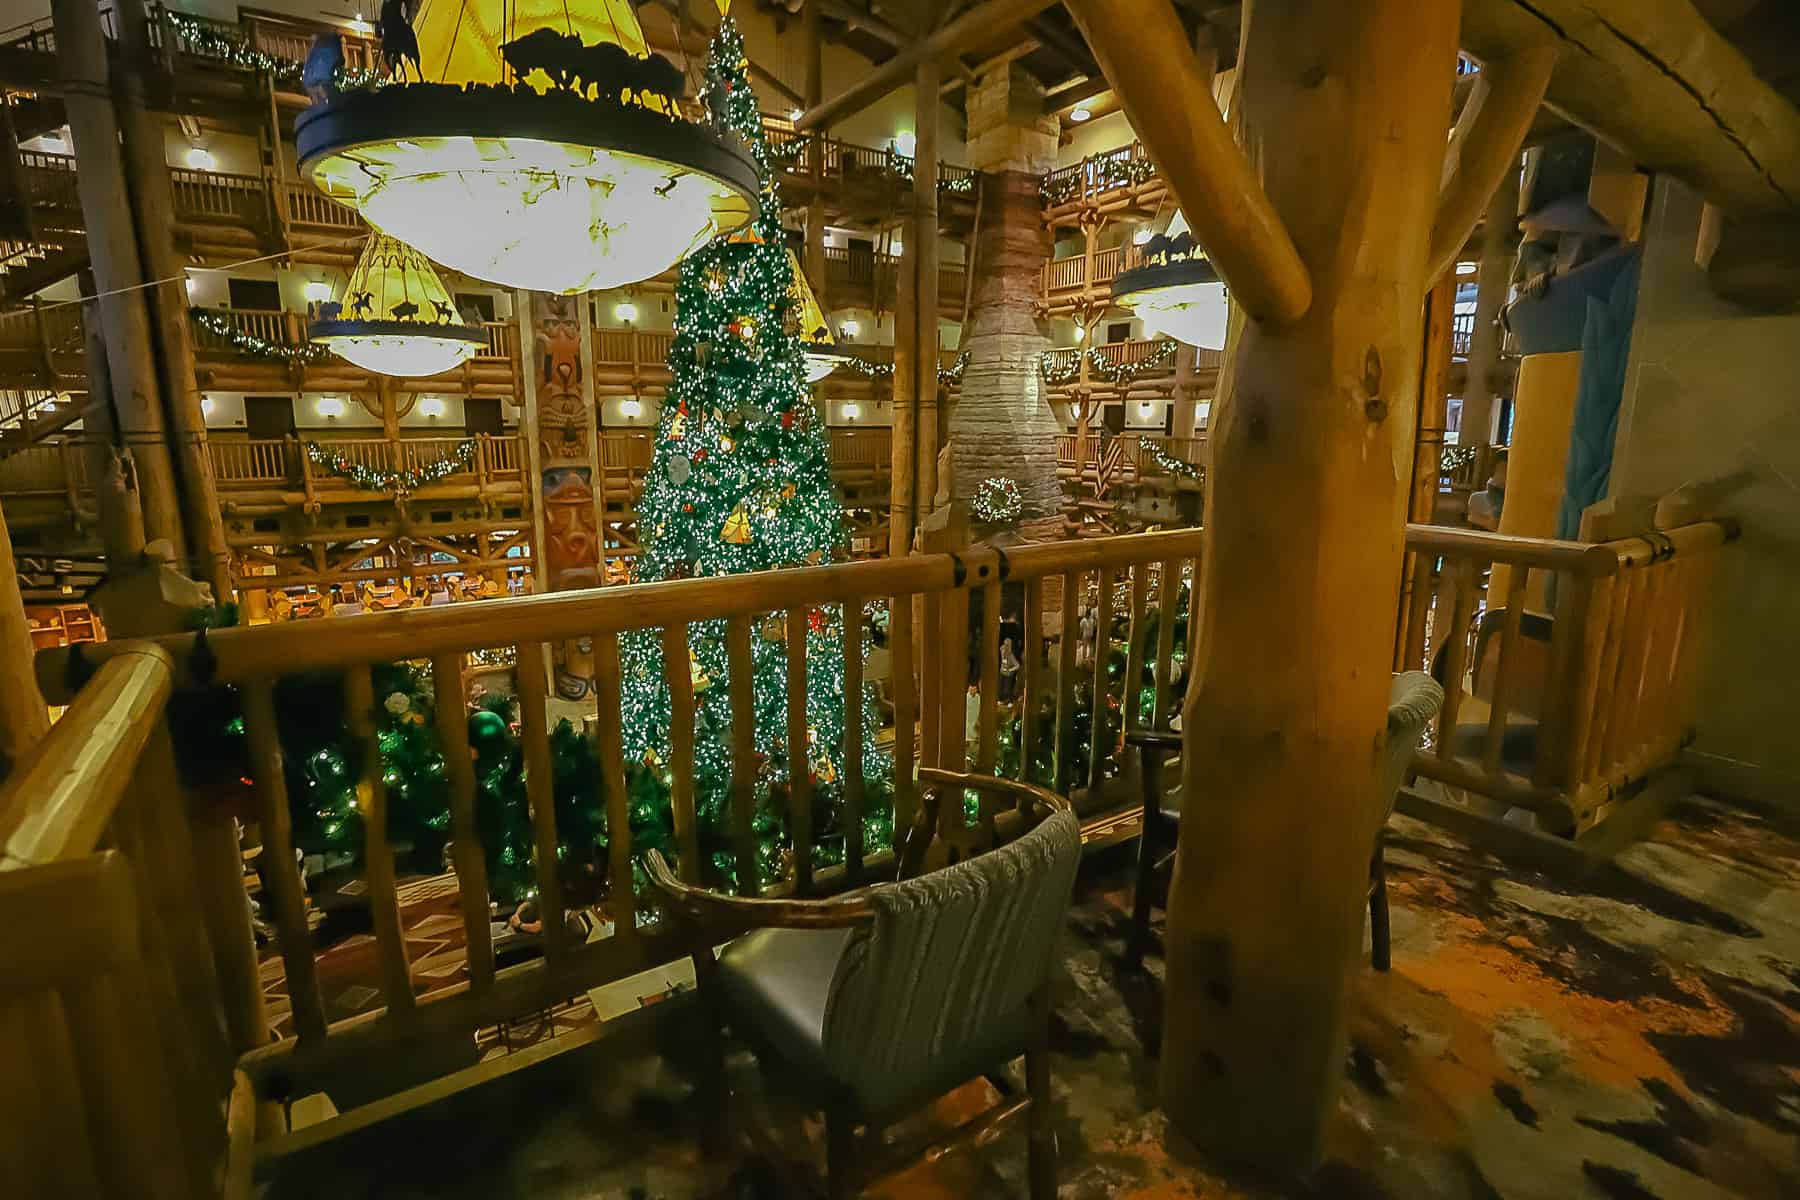 Seats are available on the upper floors to rest and take in the views of the Christmas Tree at Disney's Wilderness Lodge. 